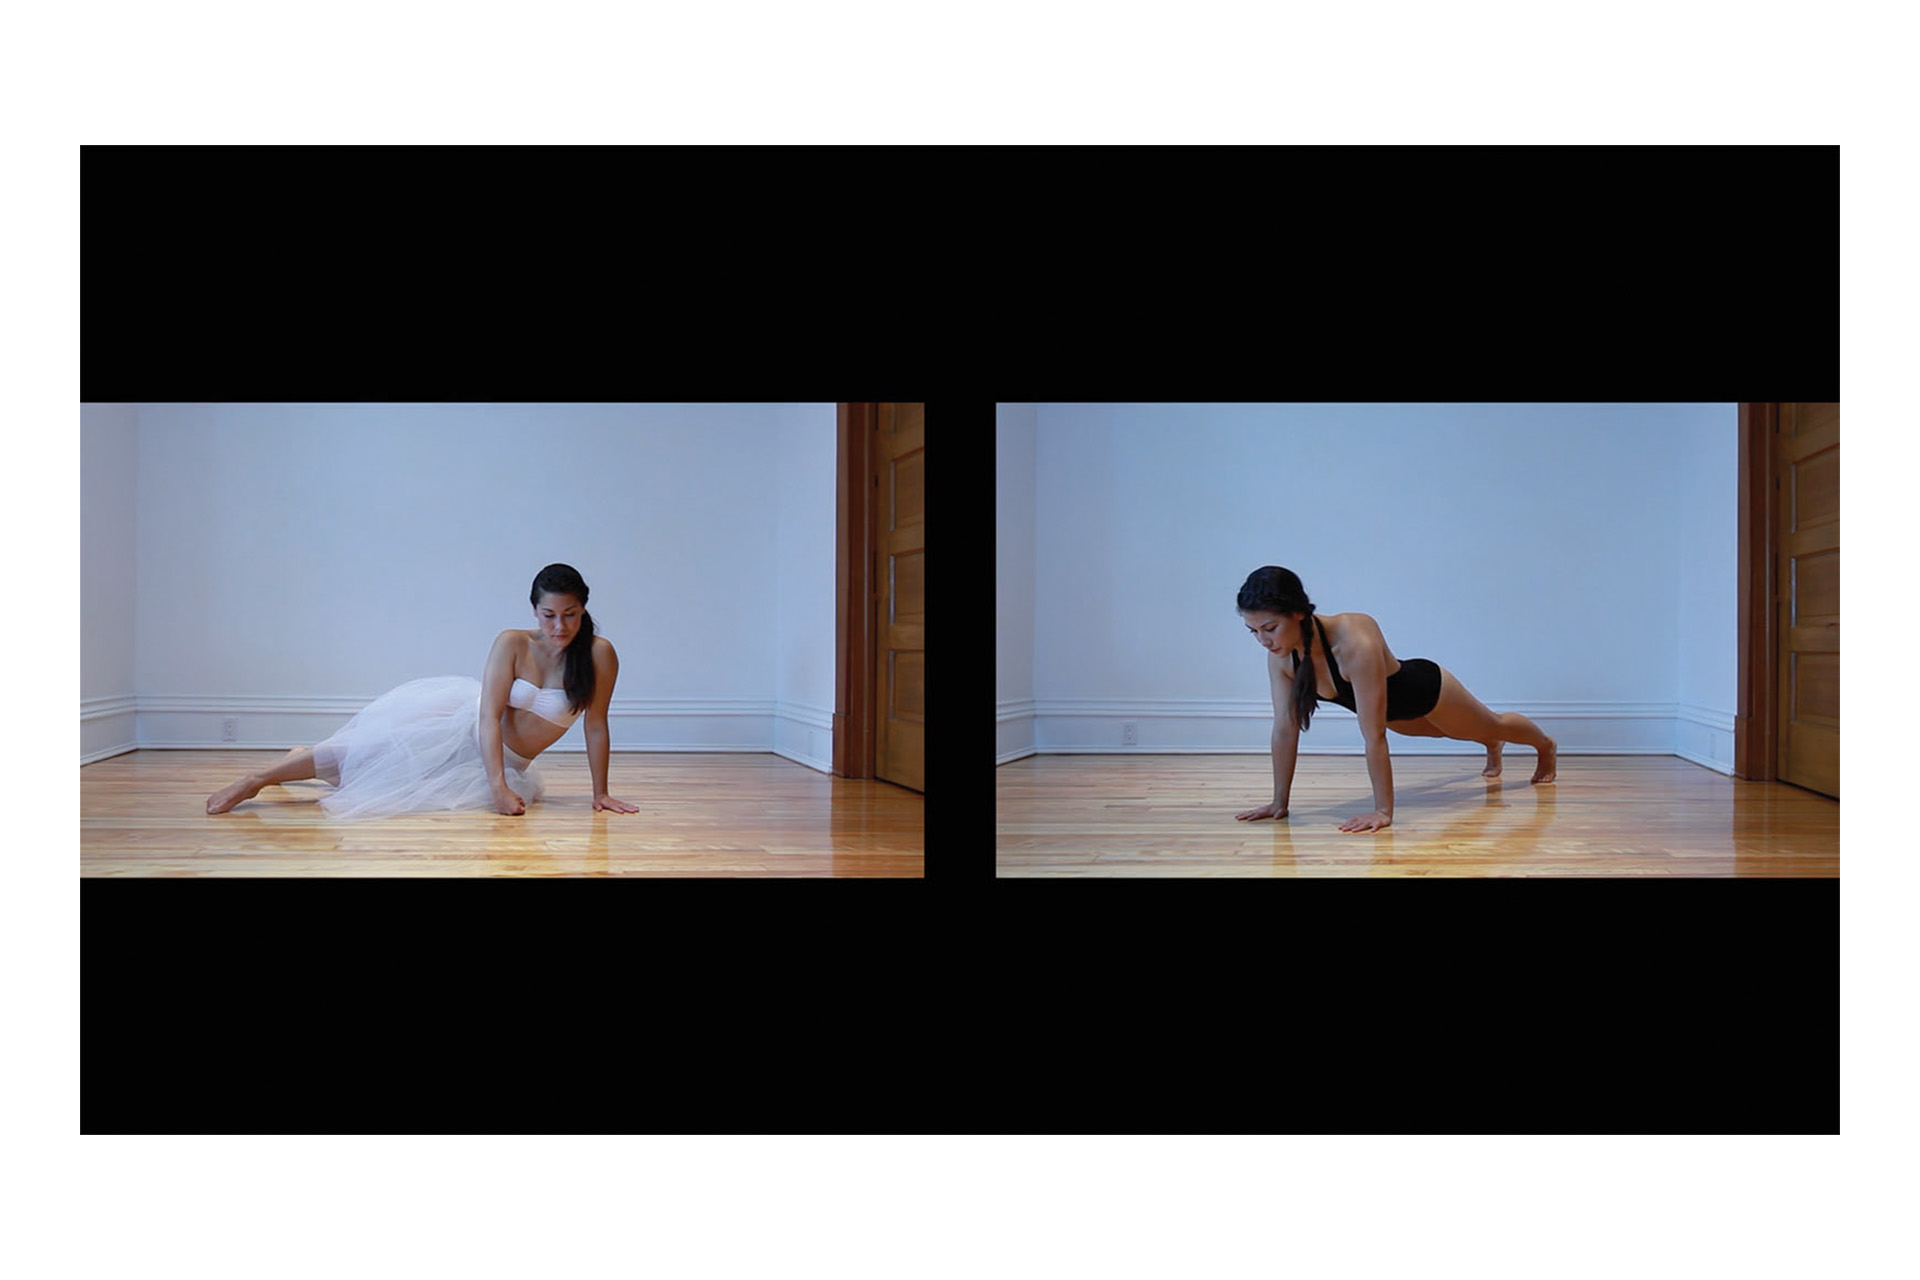 Two images of a woman doing a push up on a wooden floor.